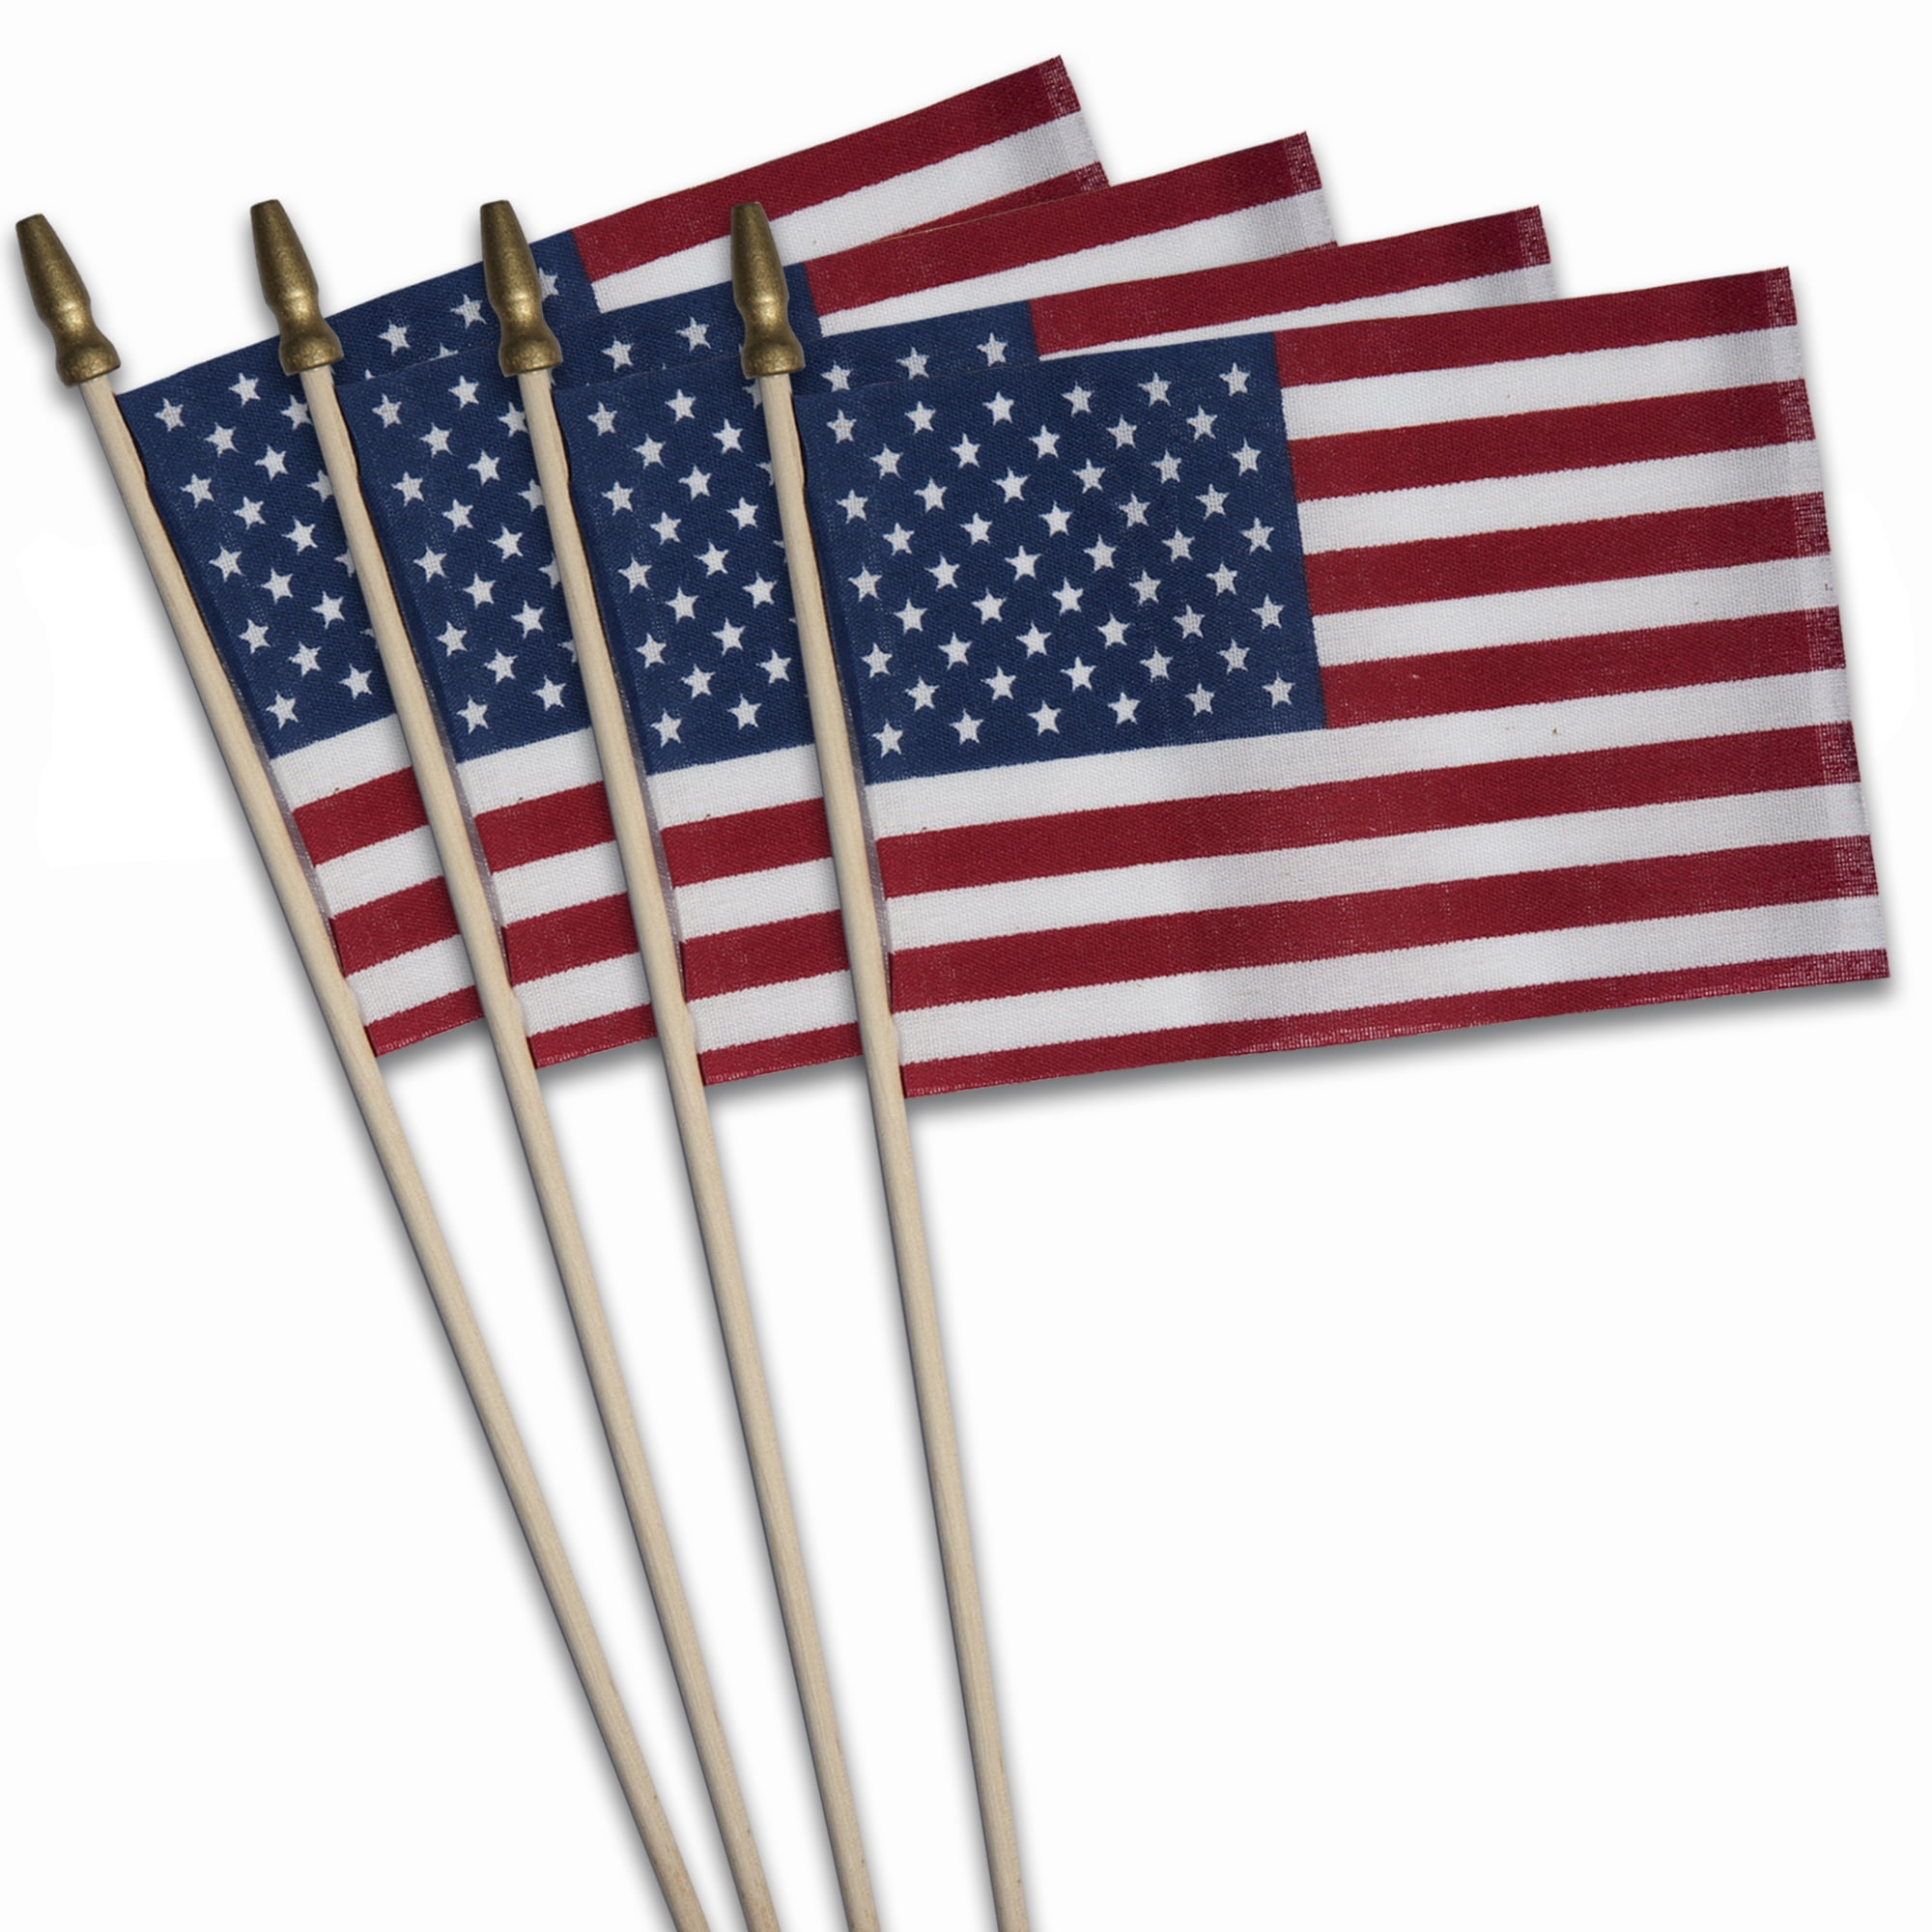 6 Pacsk Mini US American Stick Flag 4" x 6" with Pole USA Small Handheld Flags 